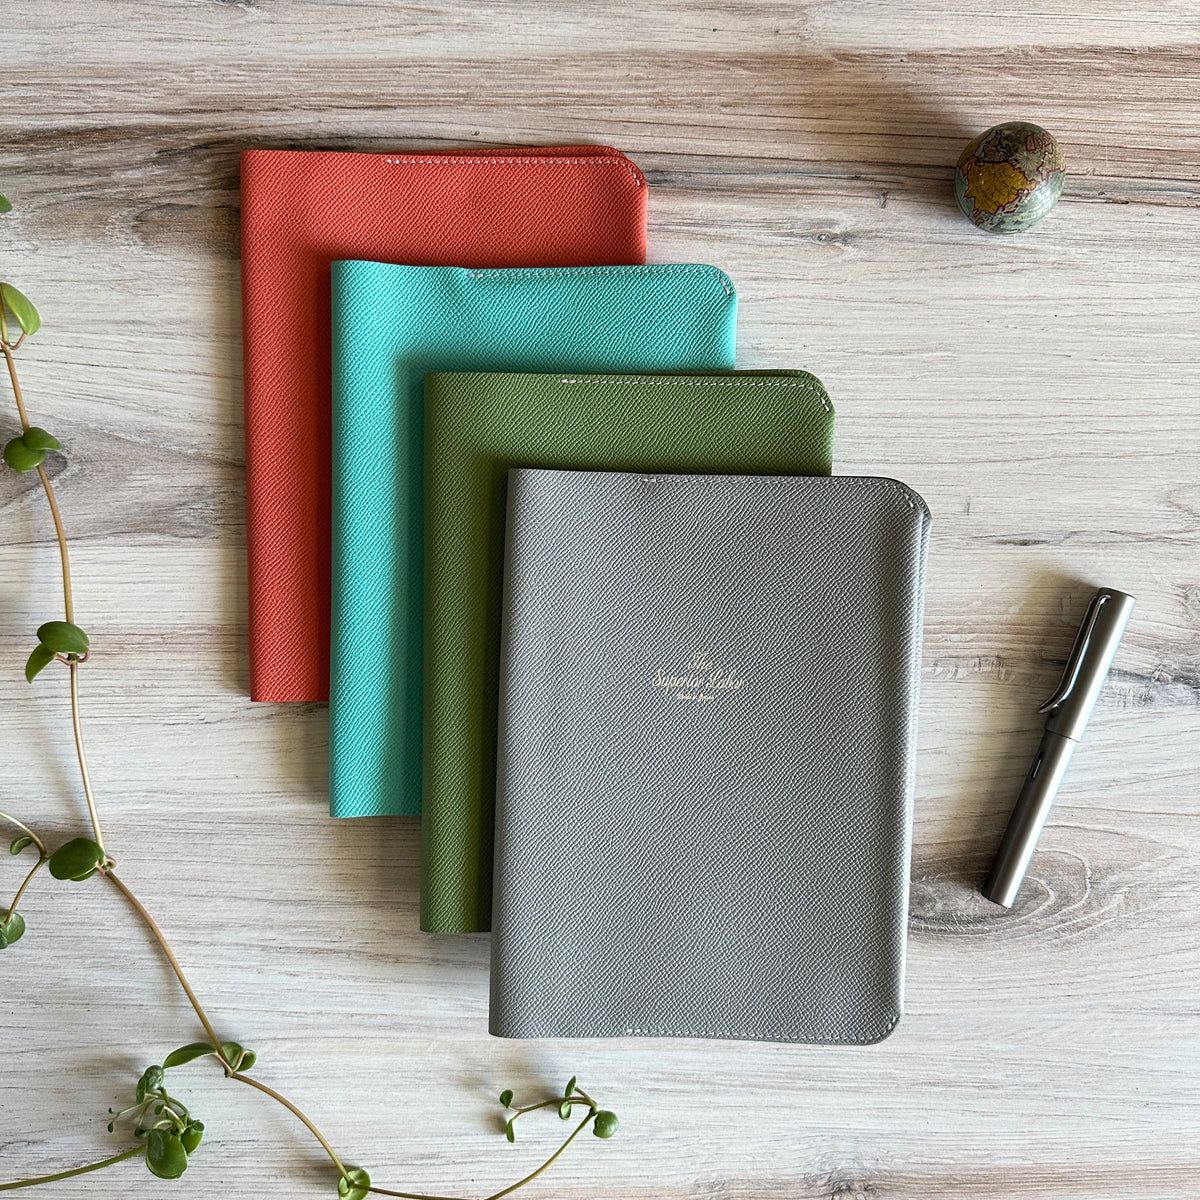 Does anyone have smythson notebook? I'm looking for the leather